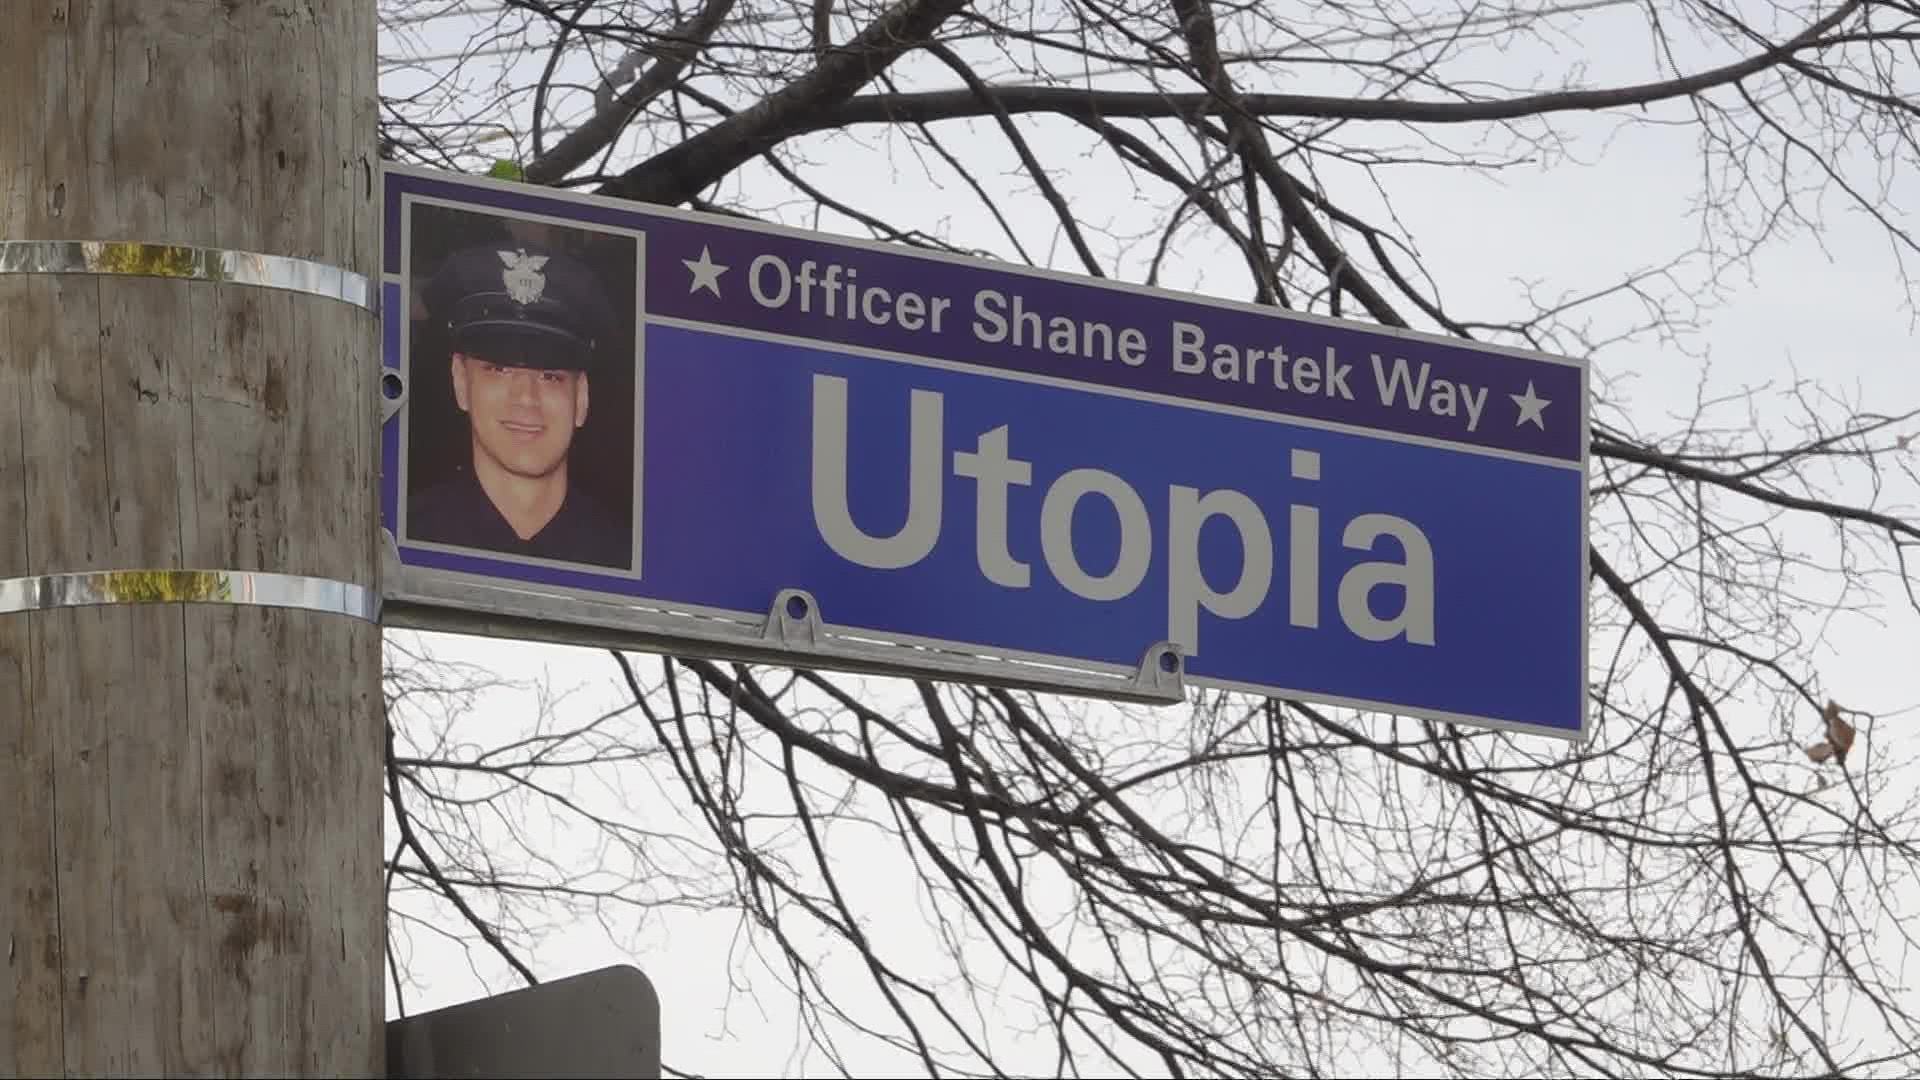 The honorarium will be added to the street of Utopia, near the intersection East 152nd Street.